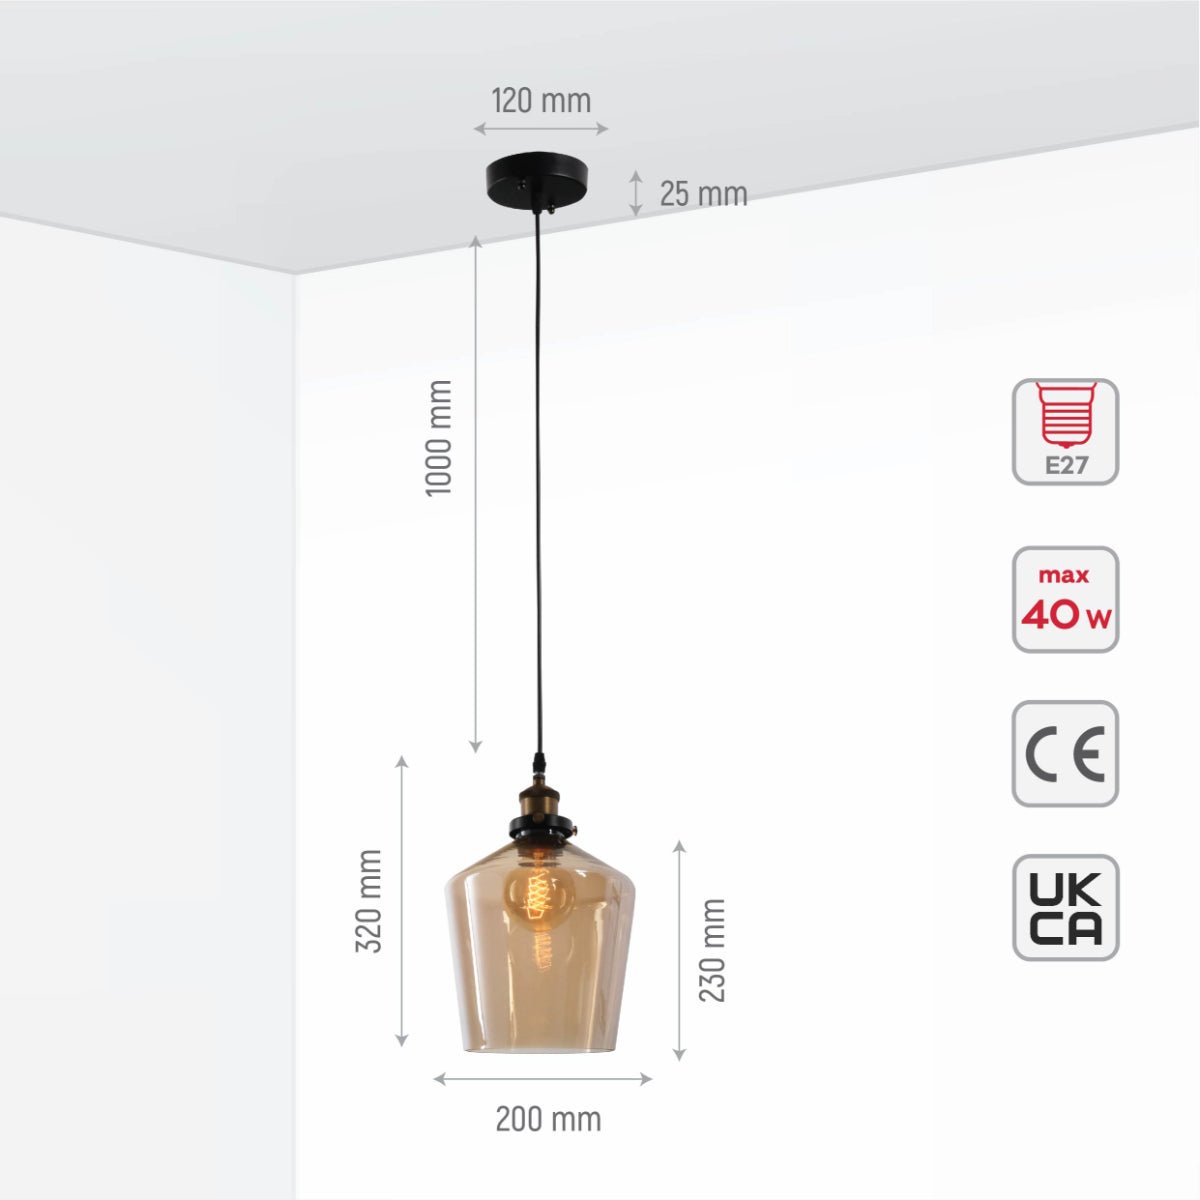 Size and specs of Amber Glass Schoolhouse Pendant Ceiling Light with E27 | TEKLED 150-17826